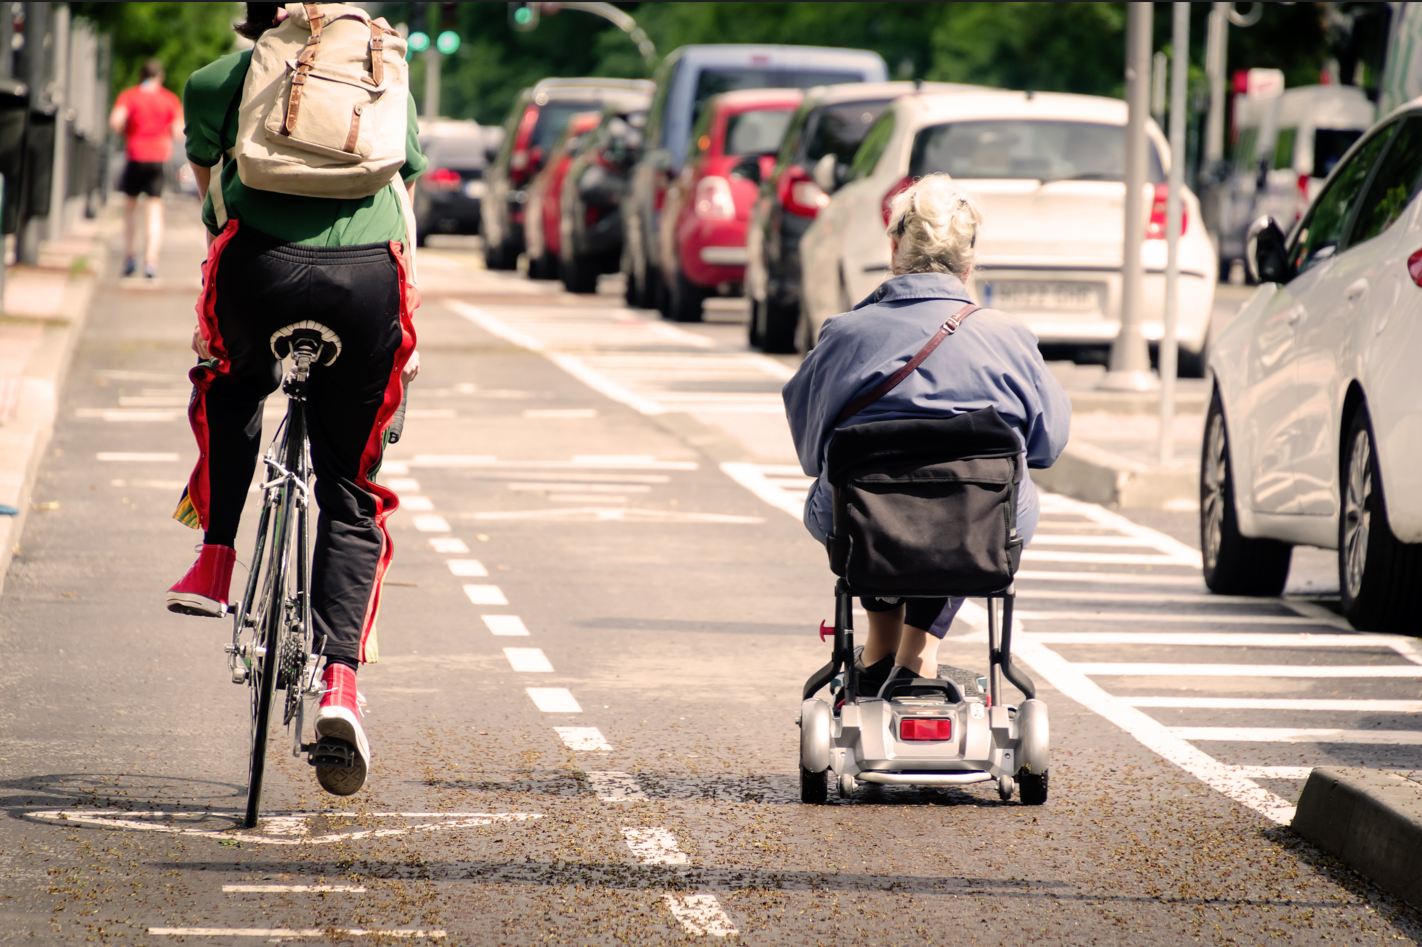 A cyclist and an elderly woman using a motorized scooter share a city bike path.